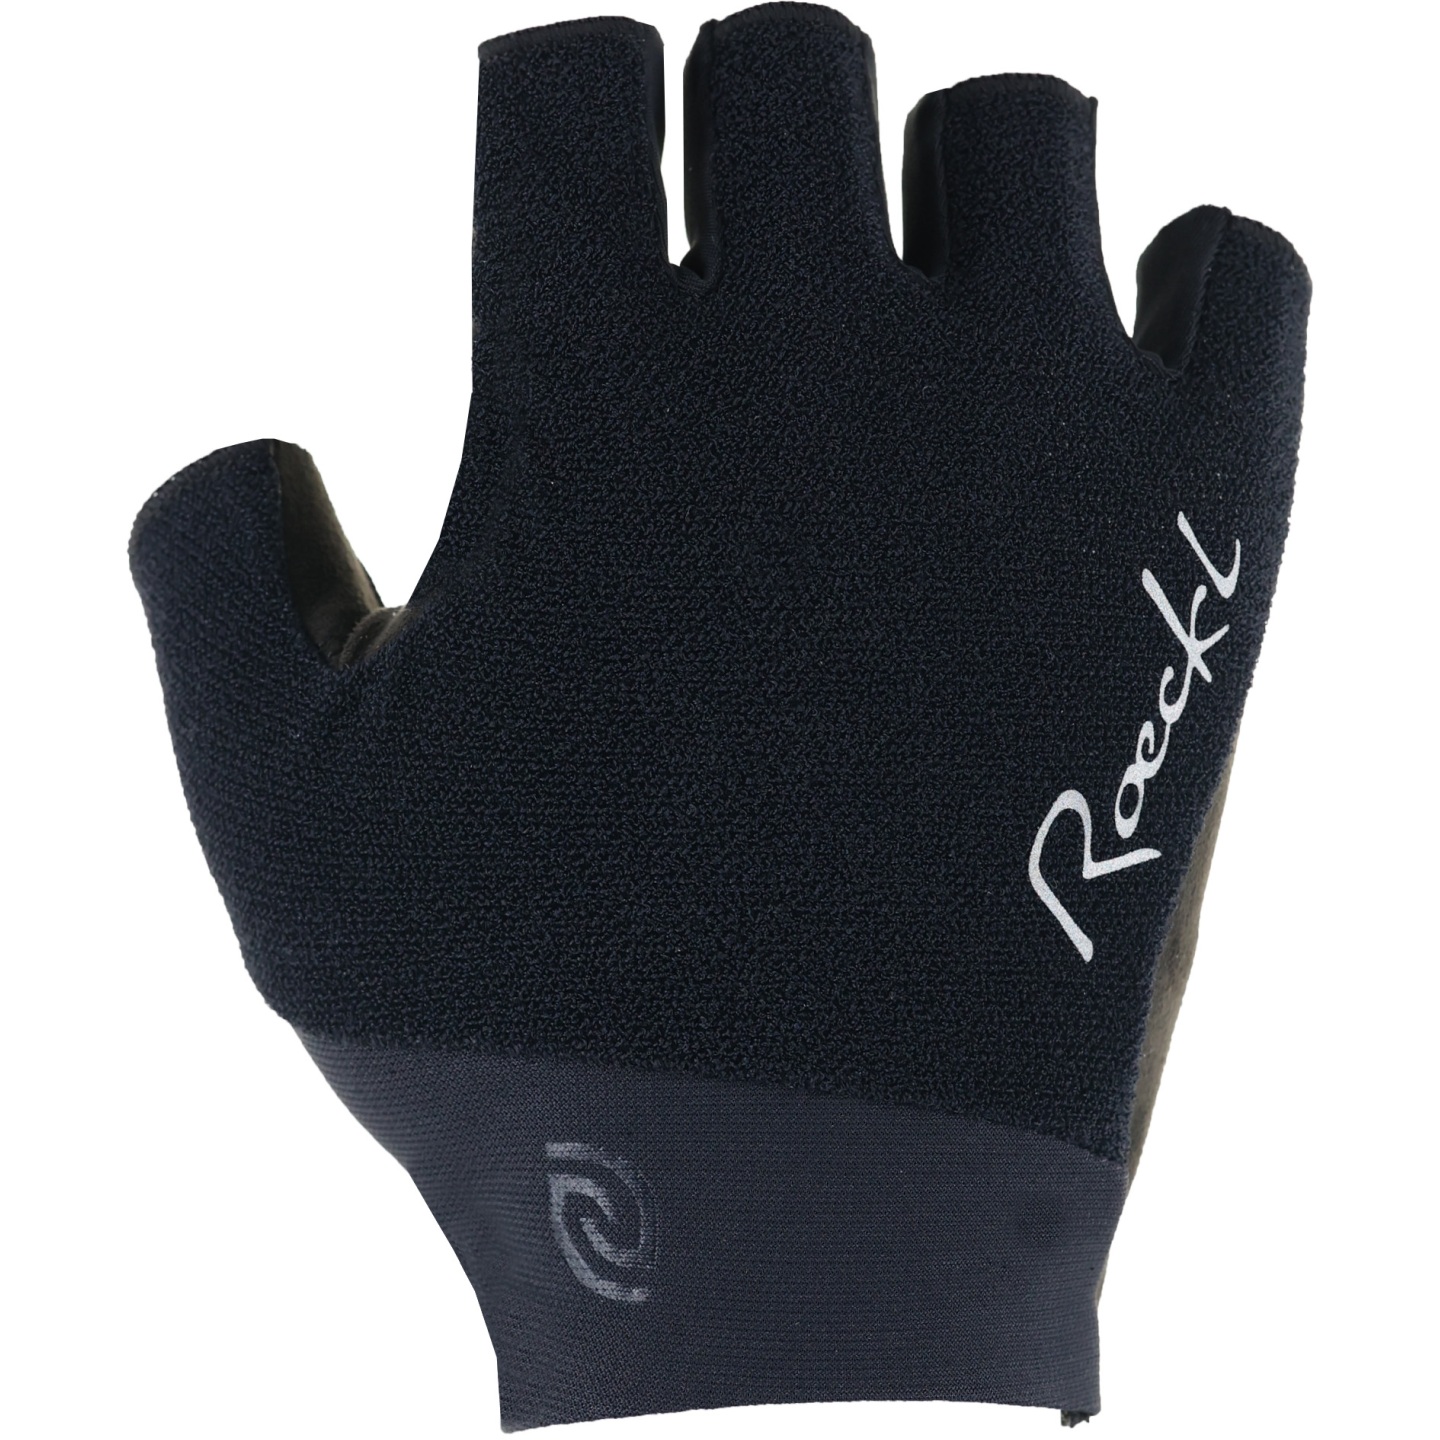 Image of Roeckl Sports Deleni Cycling Gloves Women - black 9000